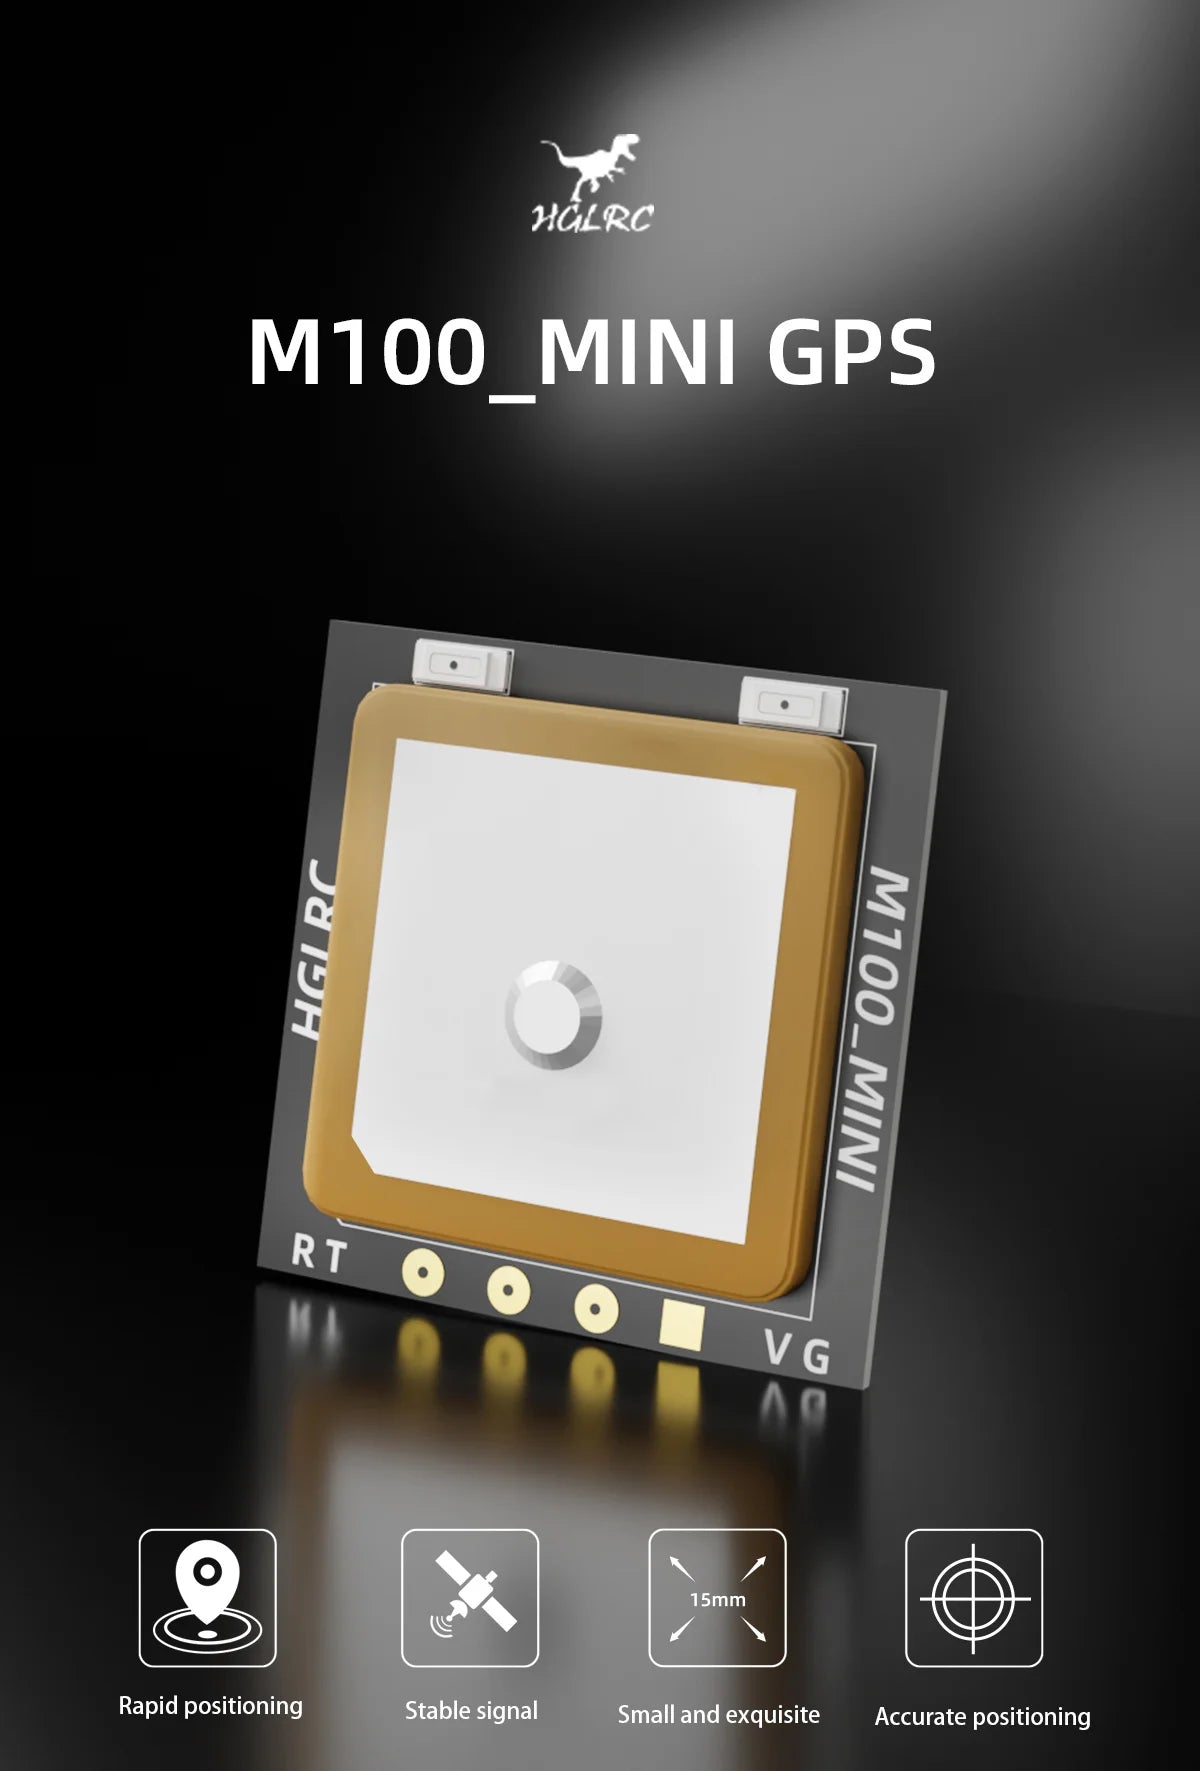 HGLRC M100 MINI GPS, MGLRC M1OO MINI GPS Rt 1Smm Rapid positioning Stable signal Small